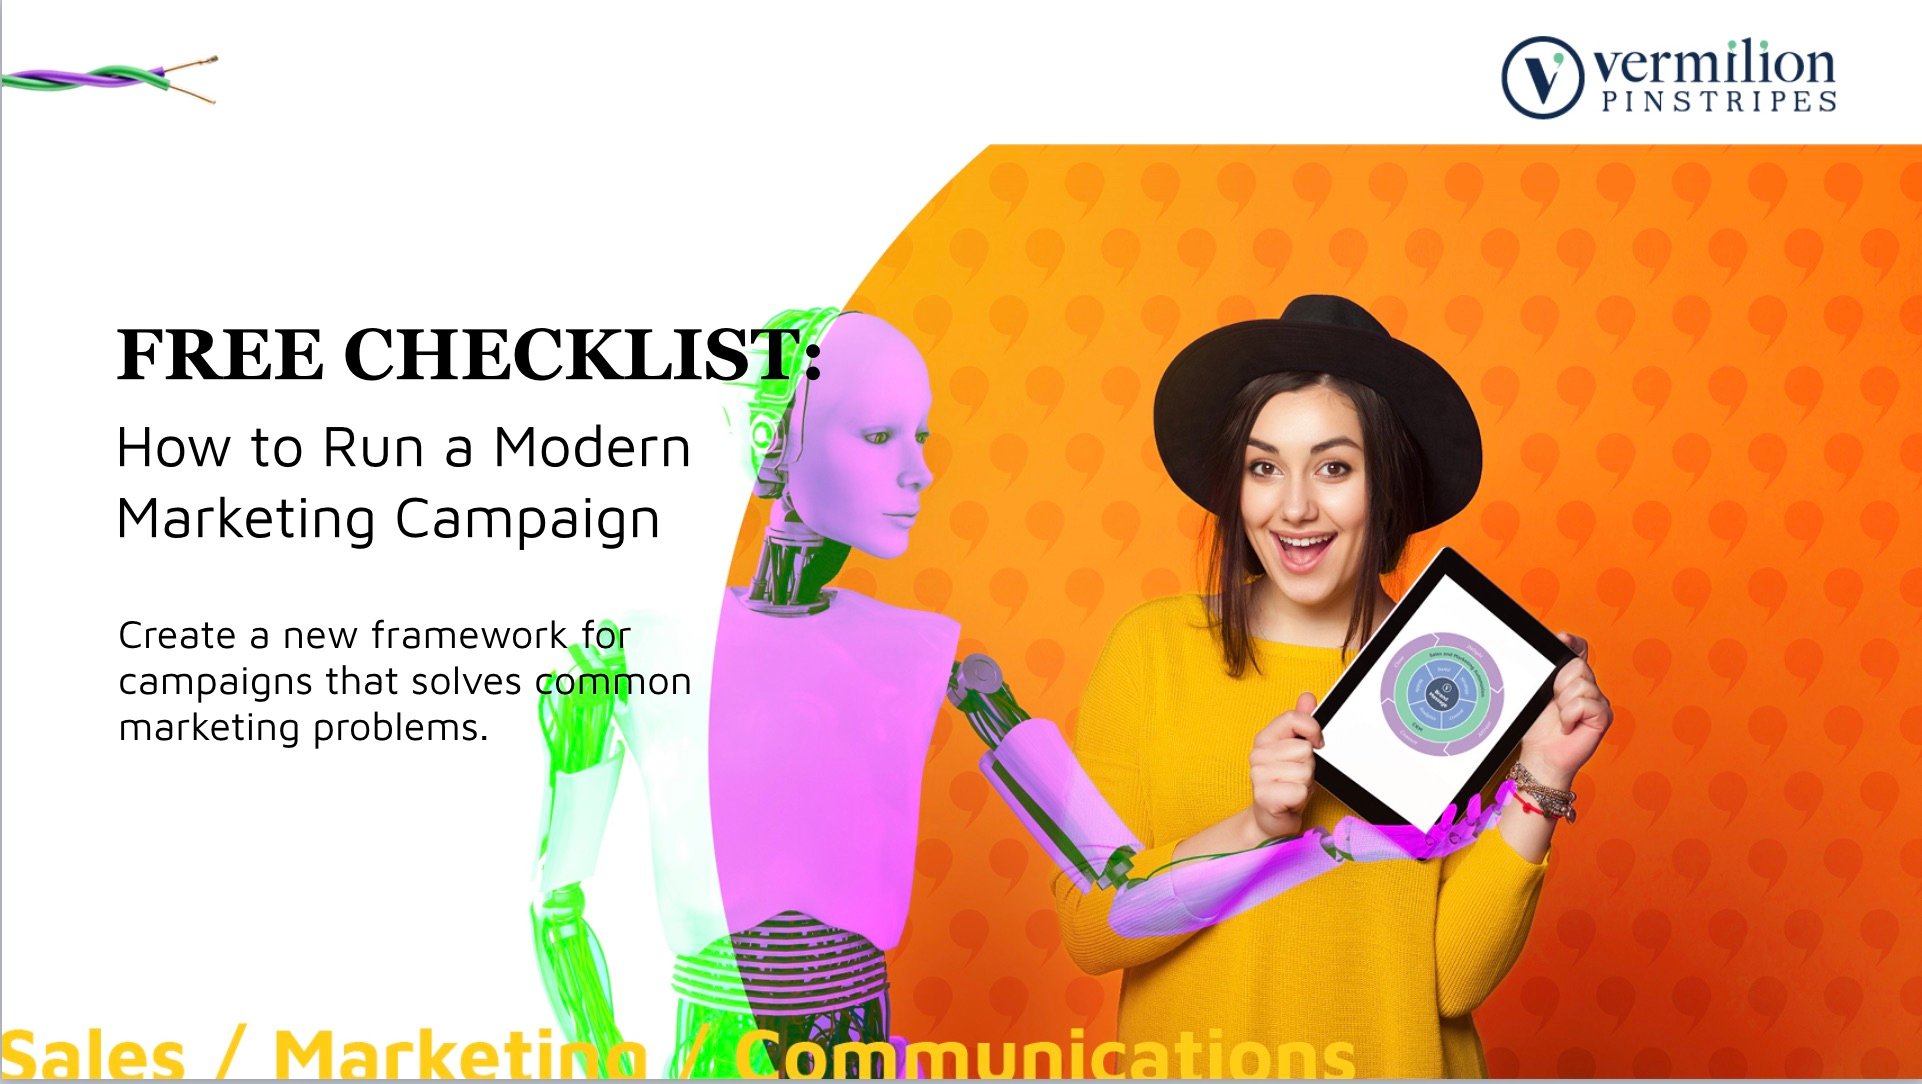 Free Marketing Campaign Checklist from Vermilion Pinstripes